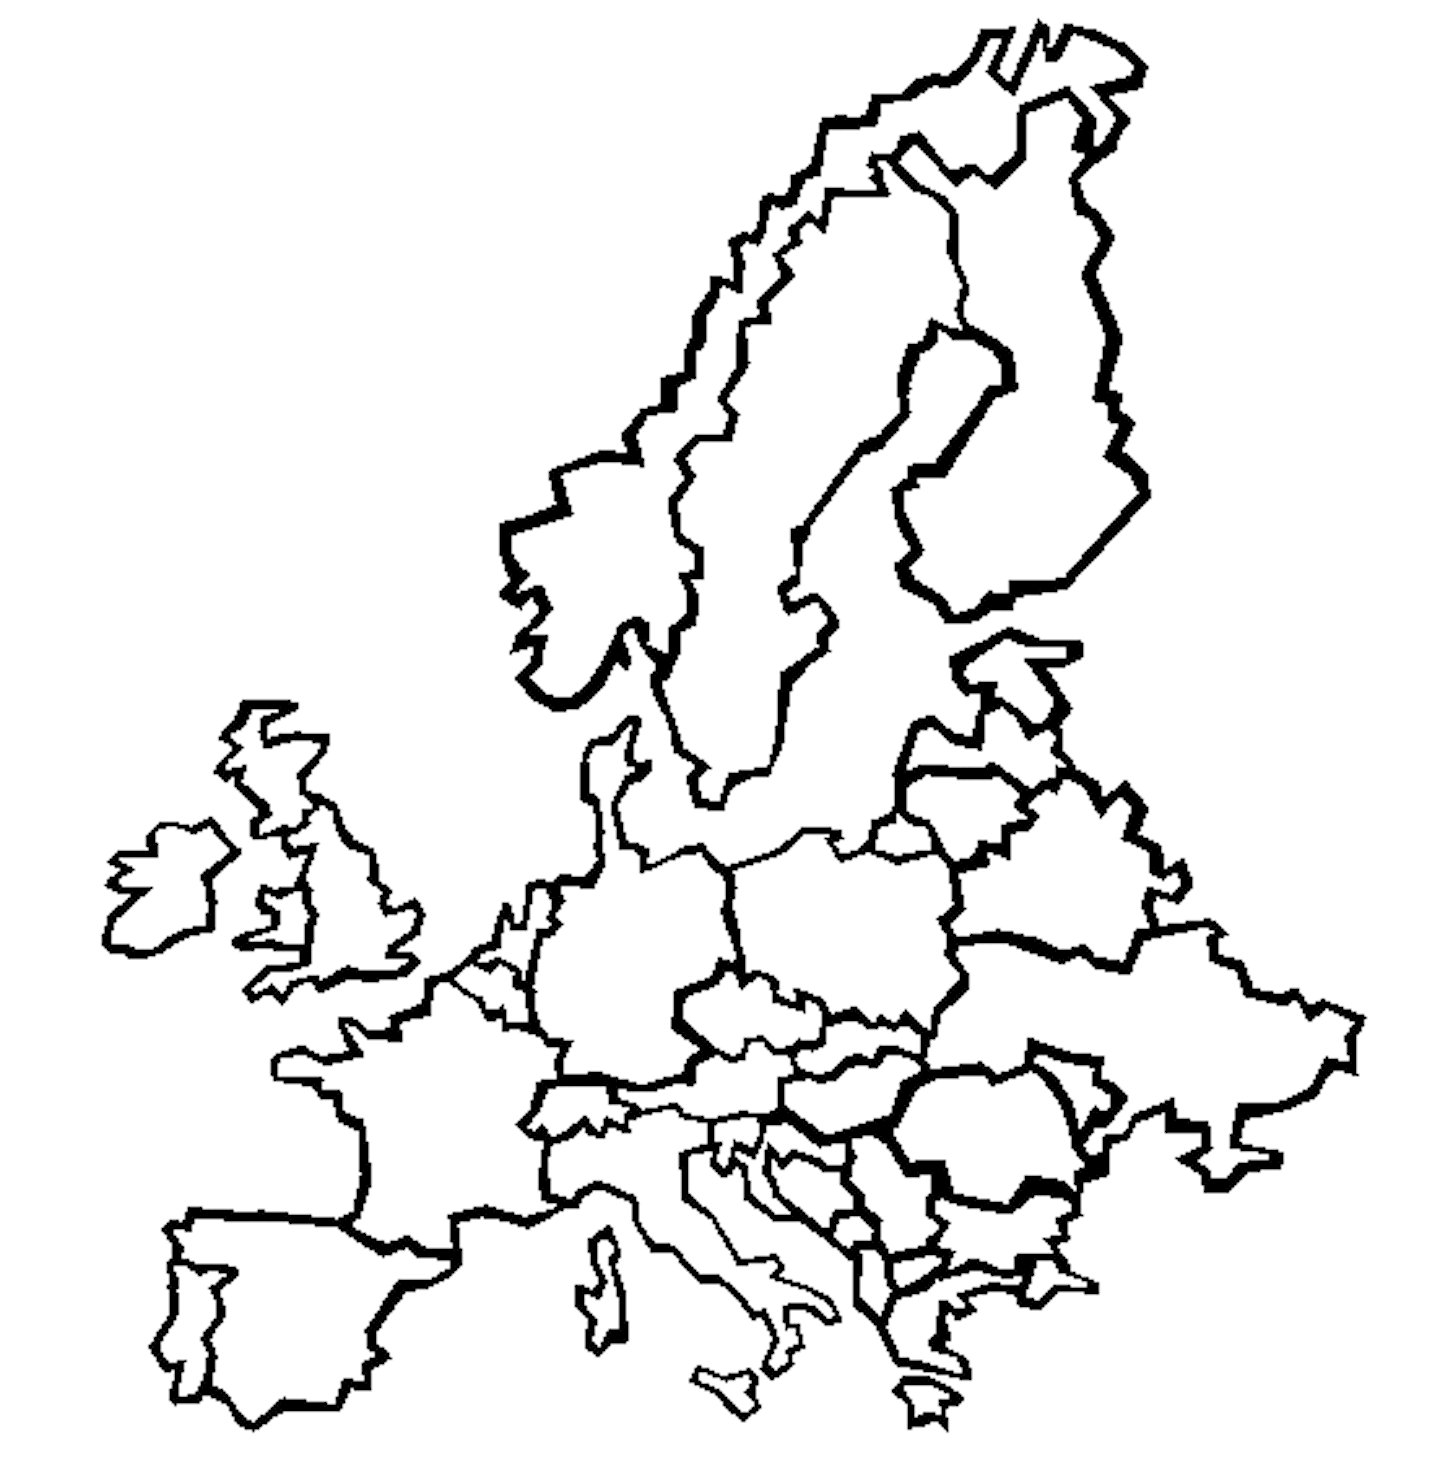 flags of europe coloring pages